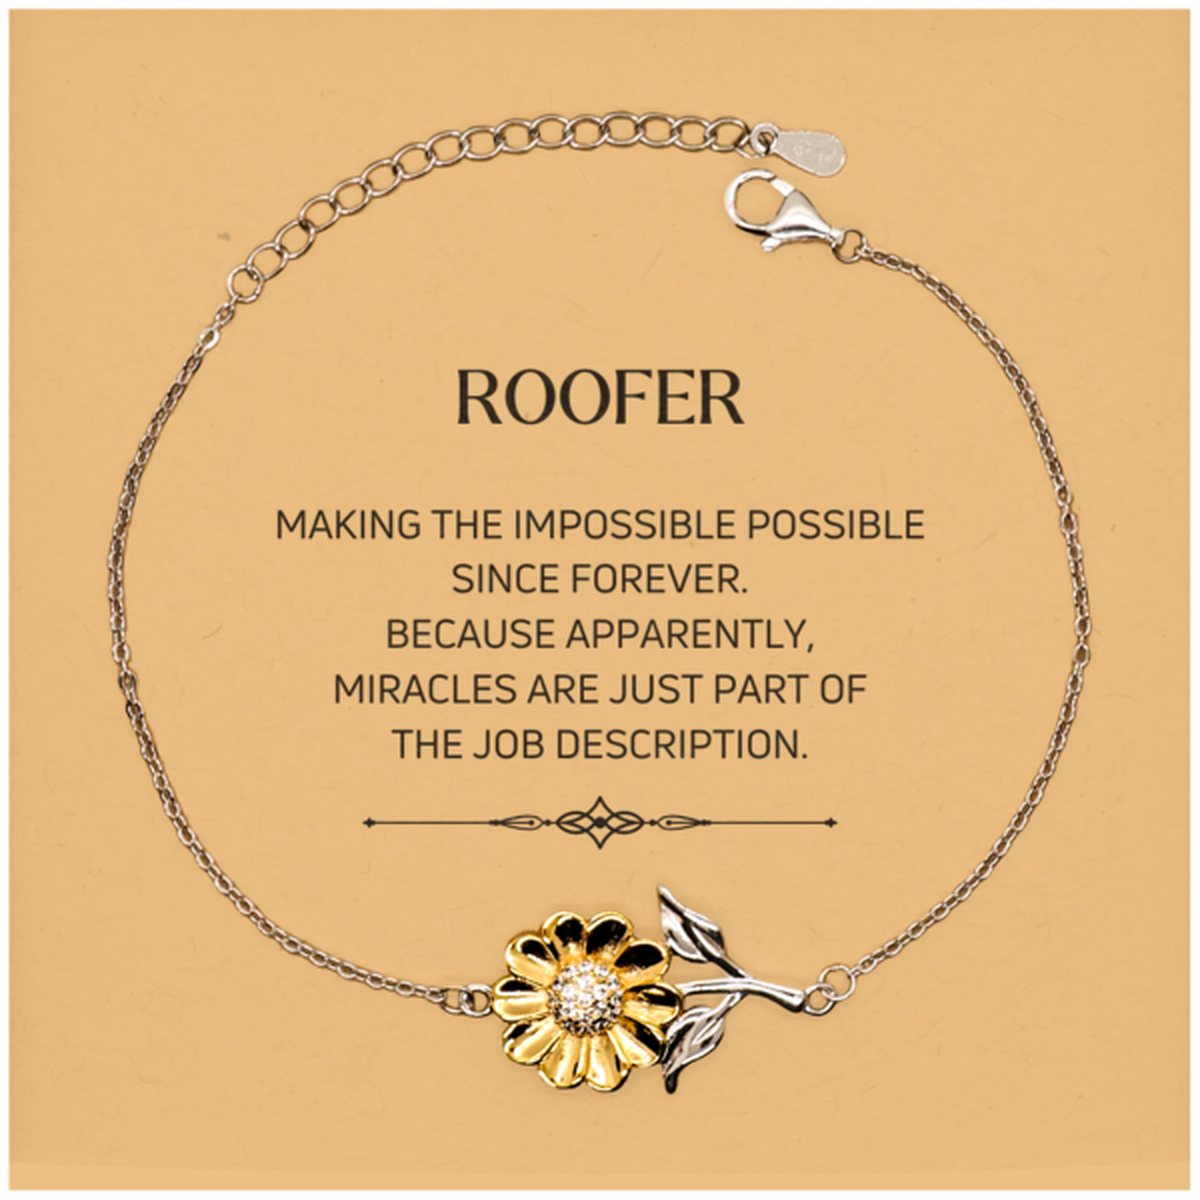 Funny Roofer Gifts, Miracles are just part of the job description, Inspirational Birthday Christmas Sunflower Bracelet For Roofer, Men, Women, Coworkers, Friends, Boss